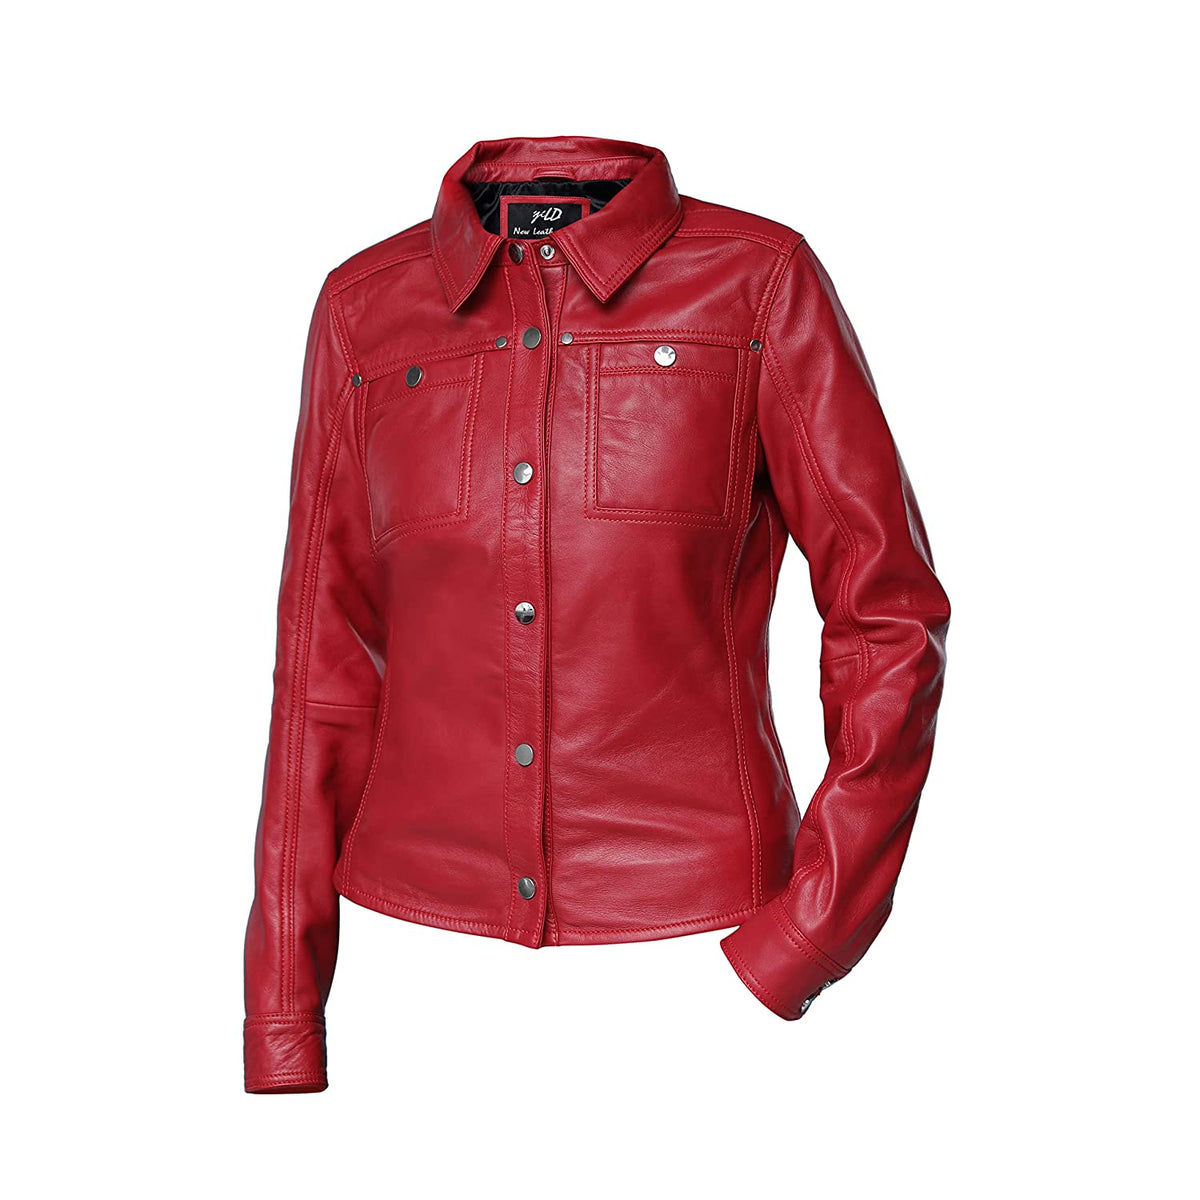 Womens Red Shirt Style Leather Jacket